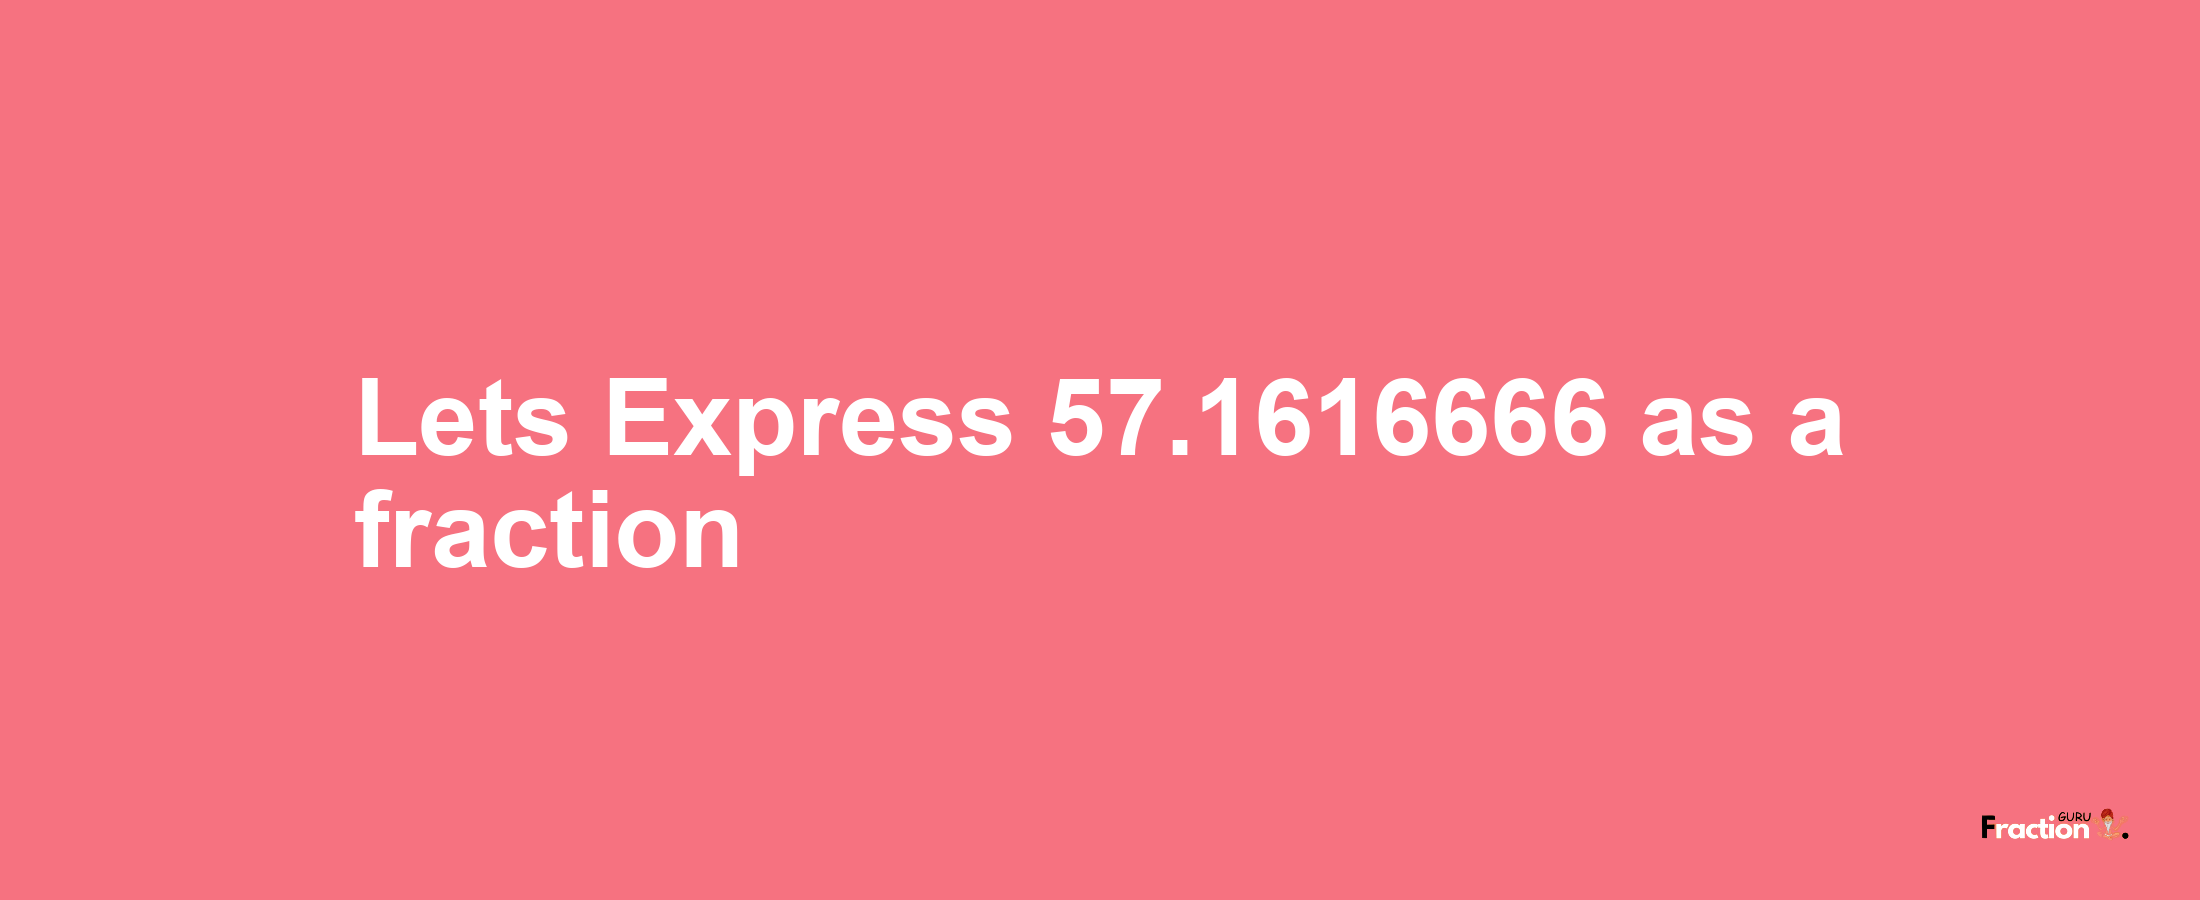 Lets Express 57.1616666 as afraction